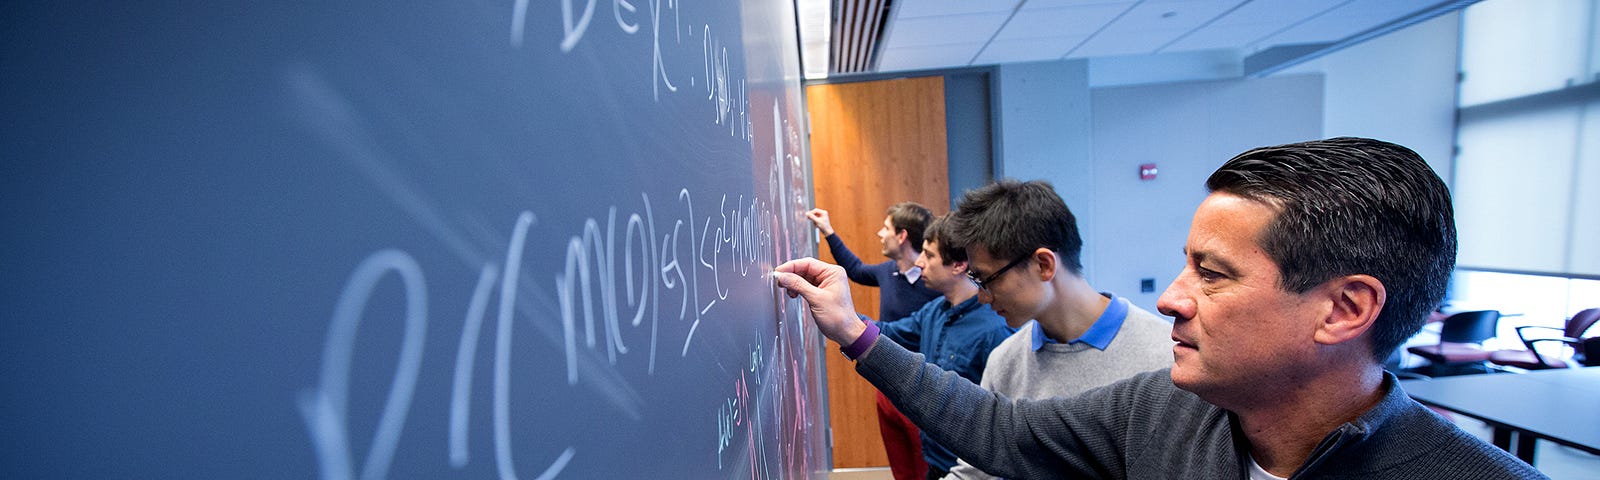 Four researchers write equations on a chalkboard.